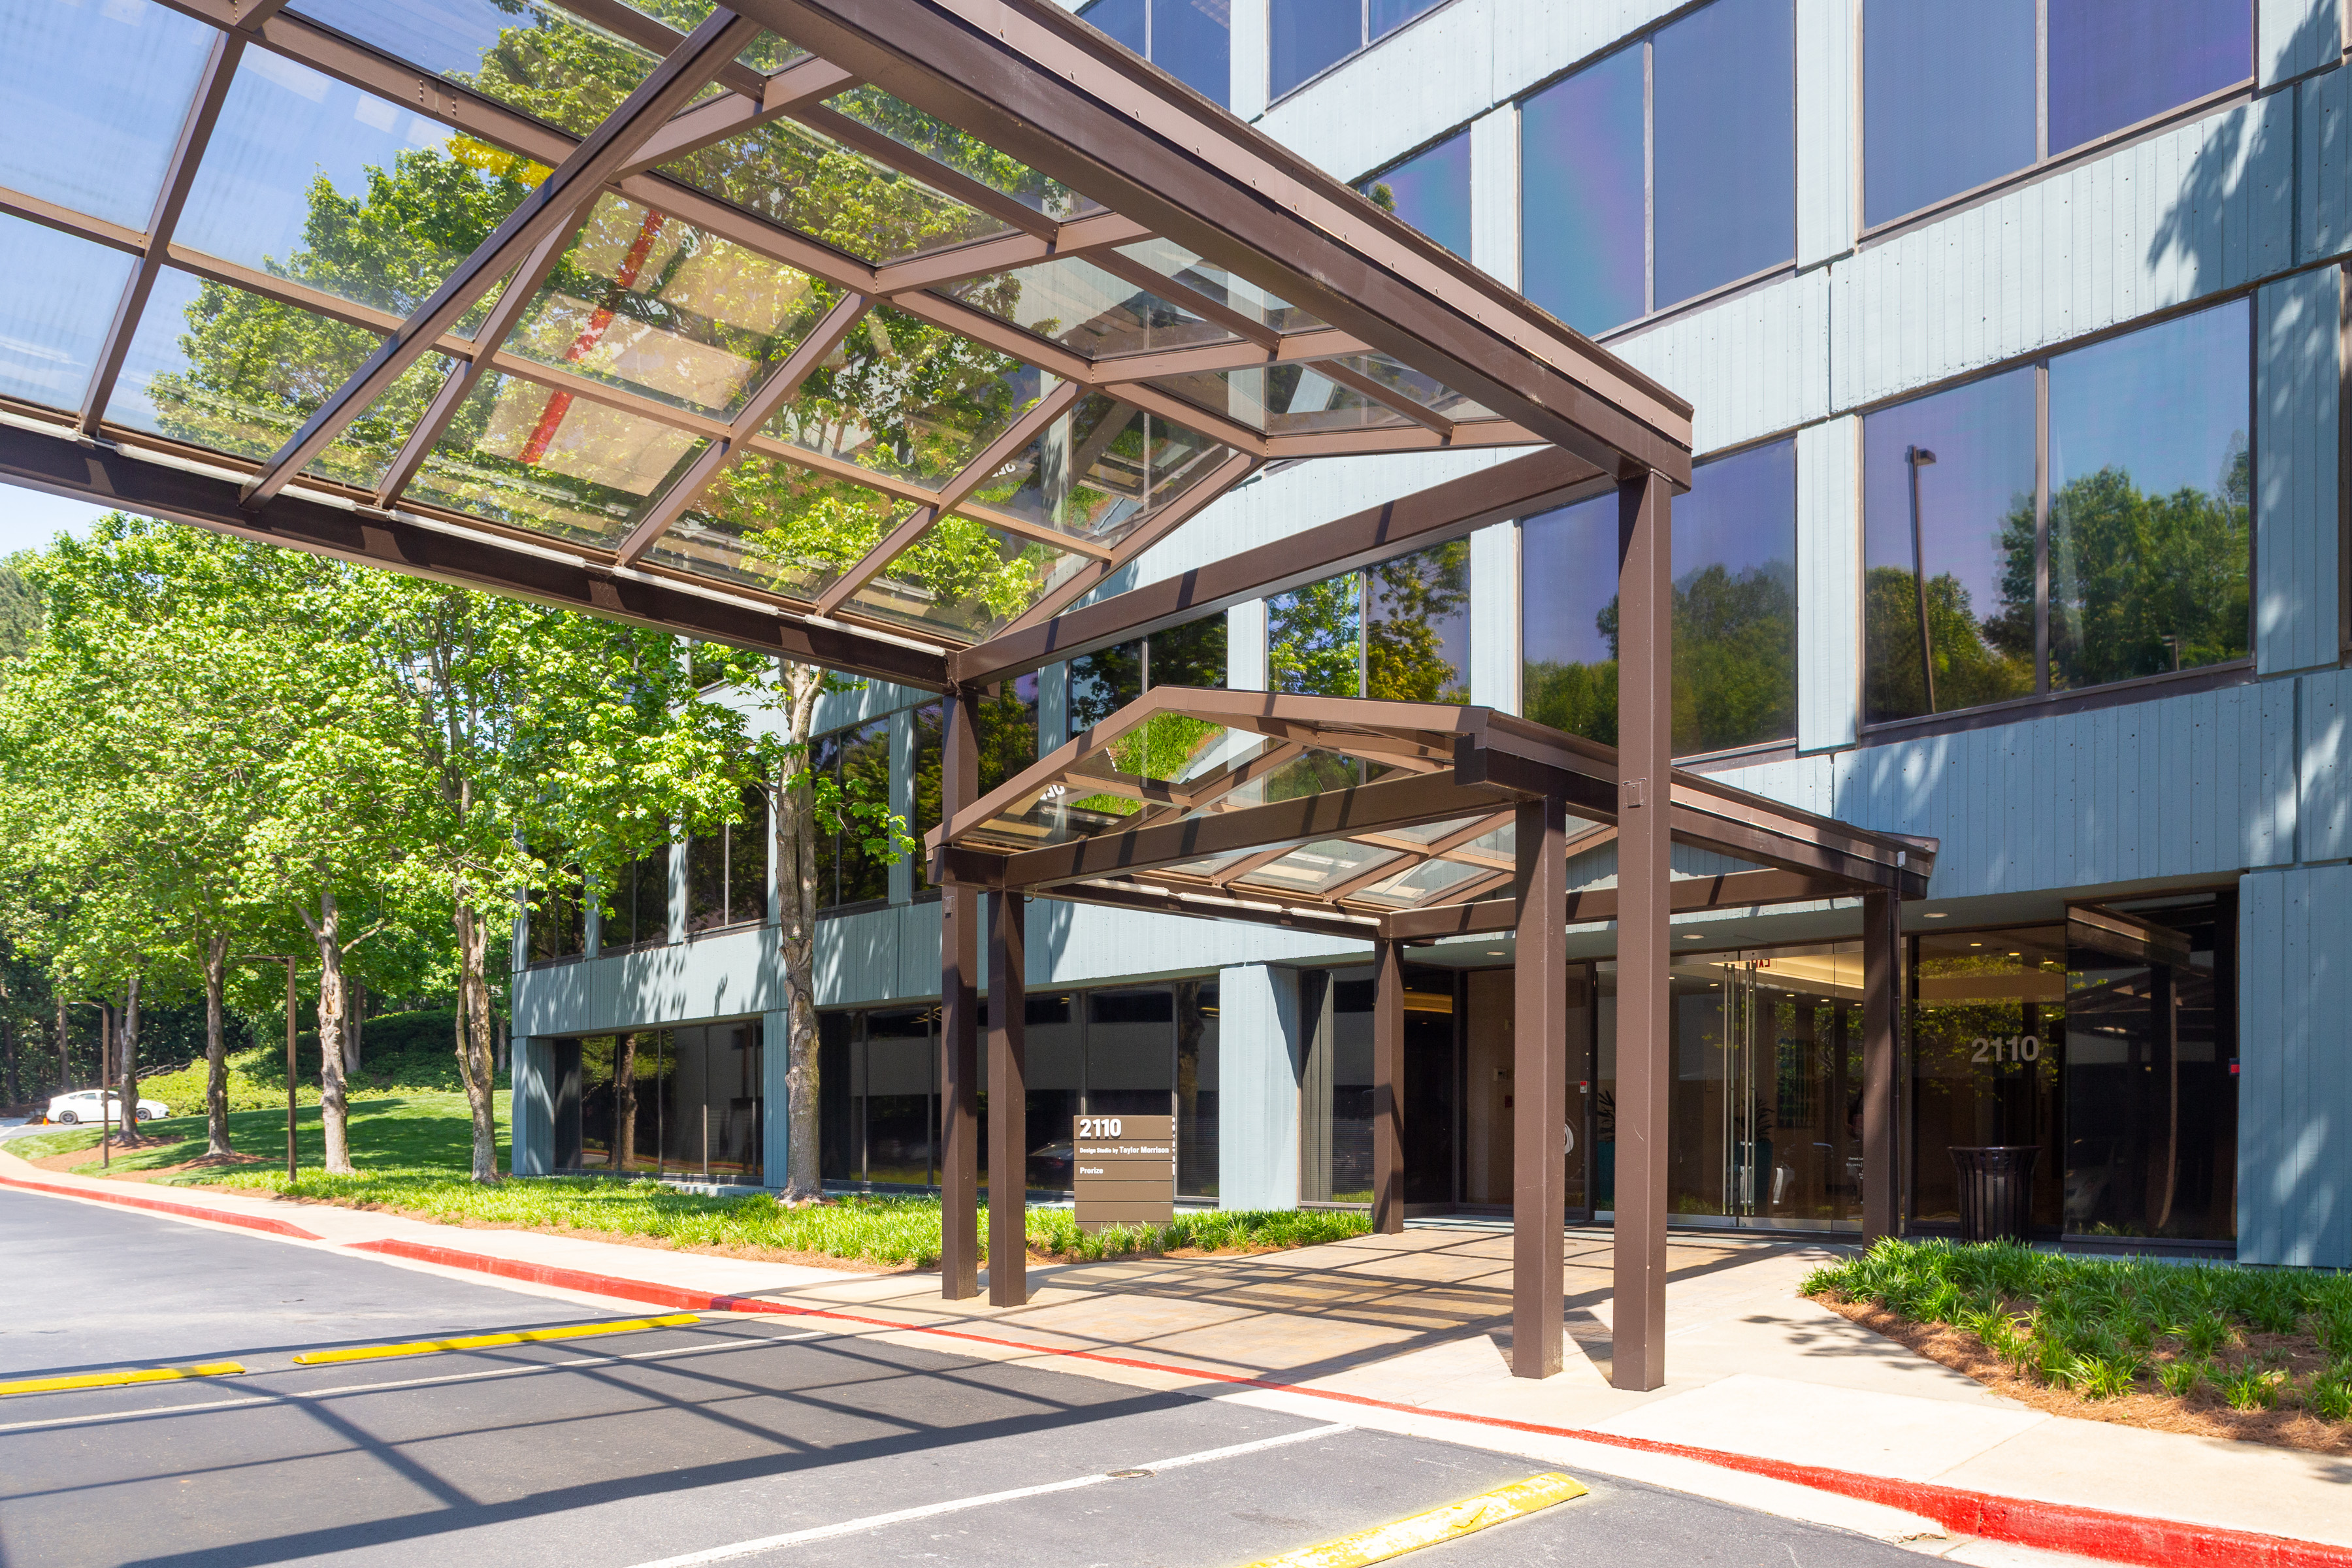 Brown and glass overhead structures form a walkway from the Shadowood office building to the parking lot